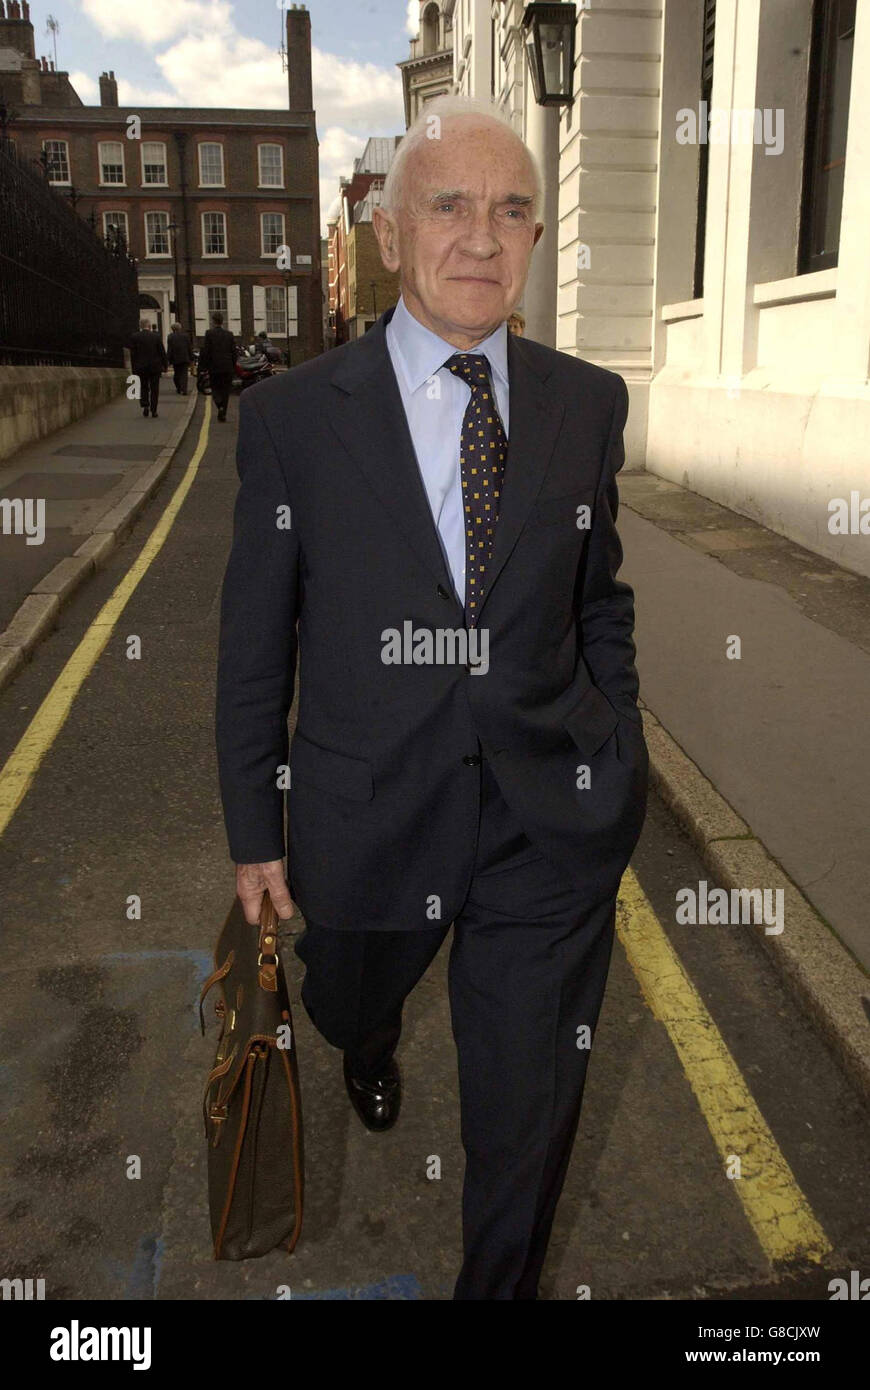 Chairman of Celtic football club Brian Quinn. Mr Quinn, the former head of supervision at BCCI, gave evidence today in BCCI case. Stock Photo